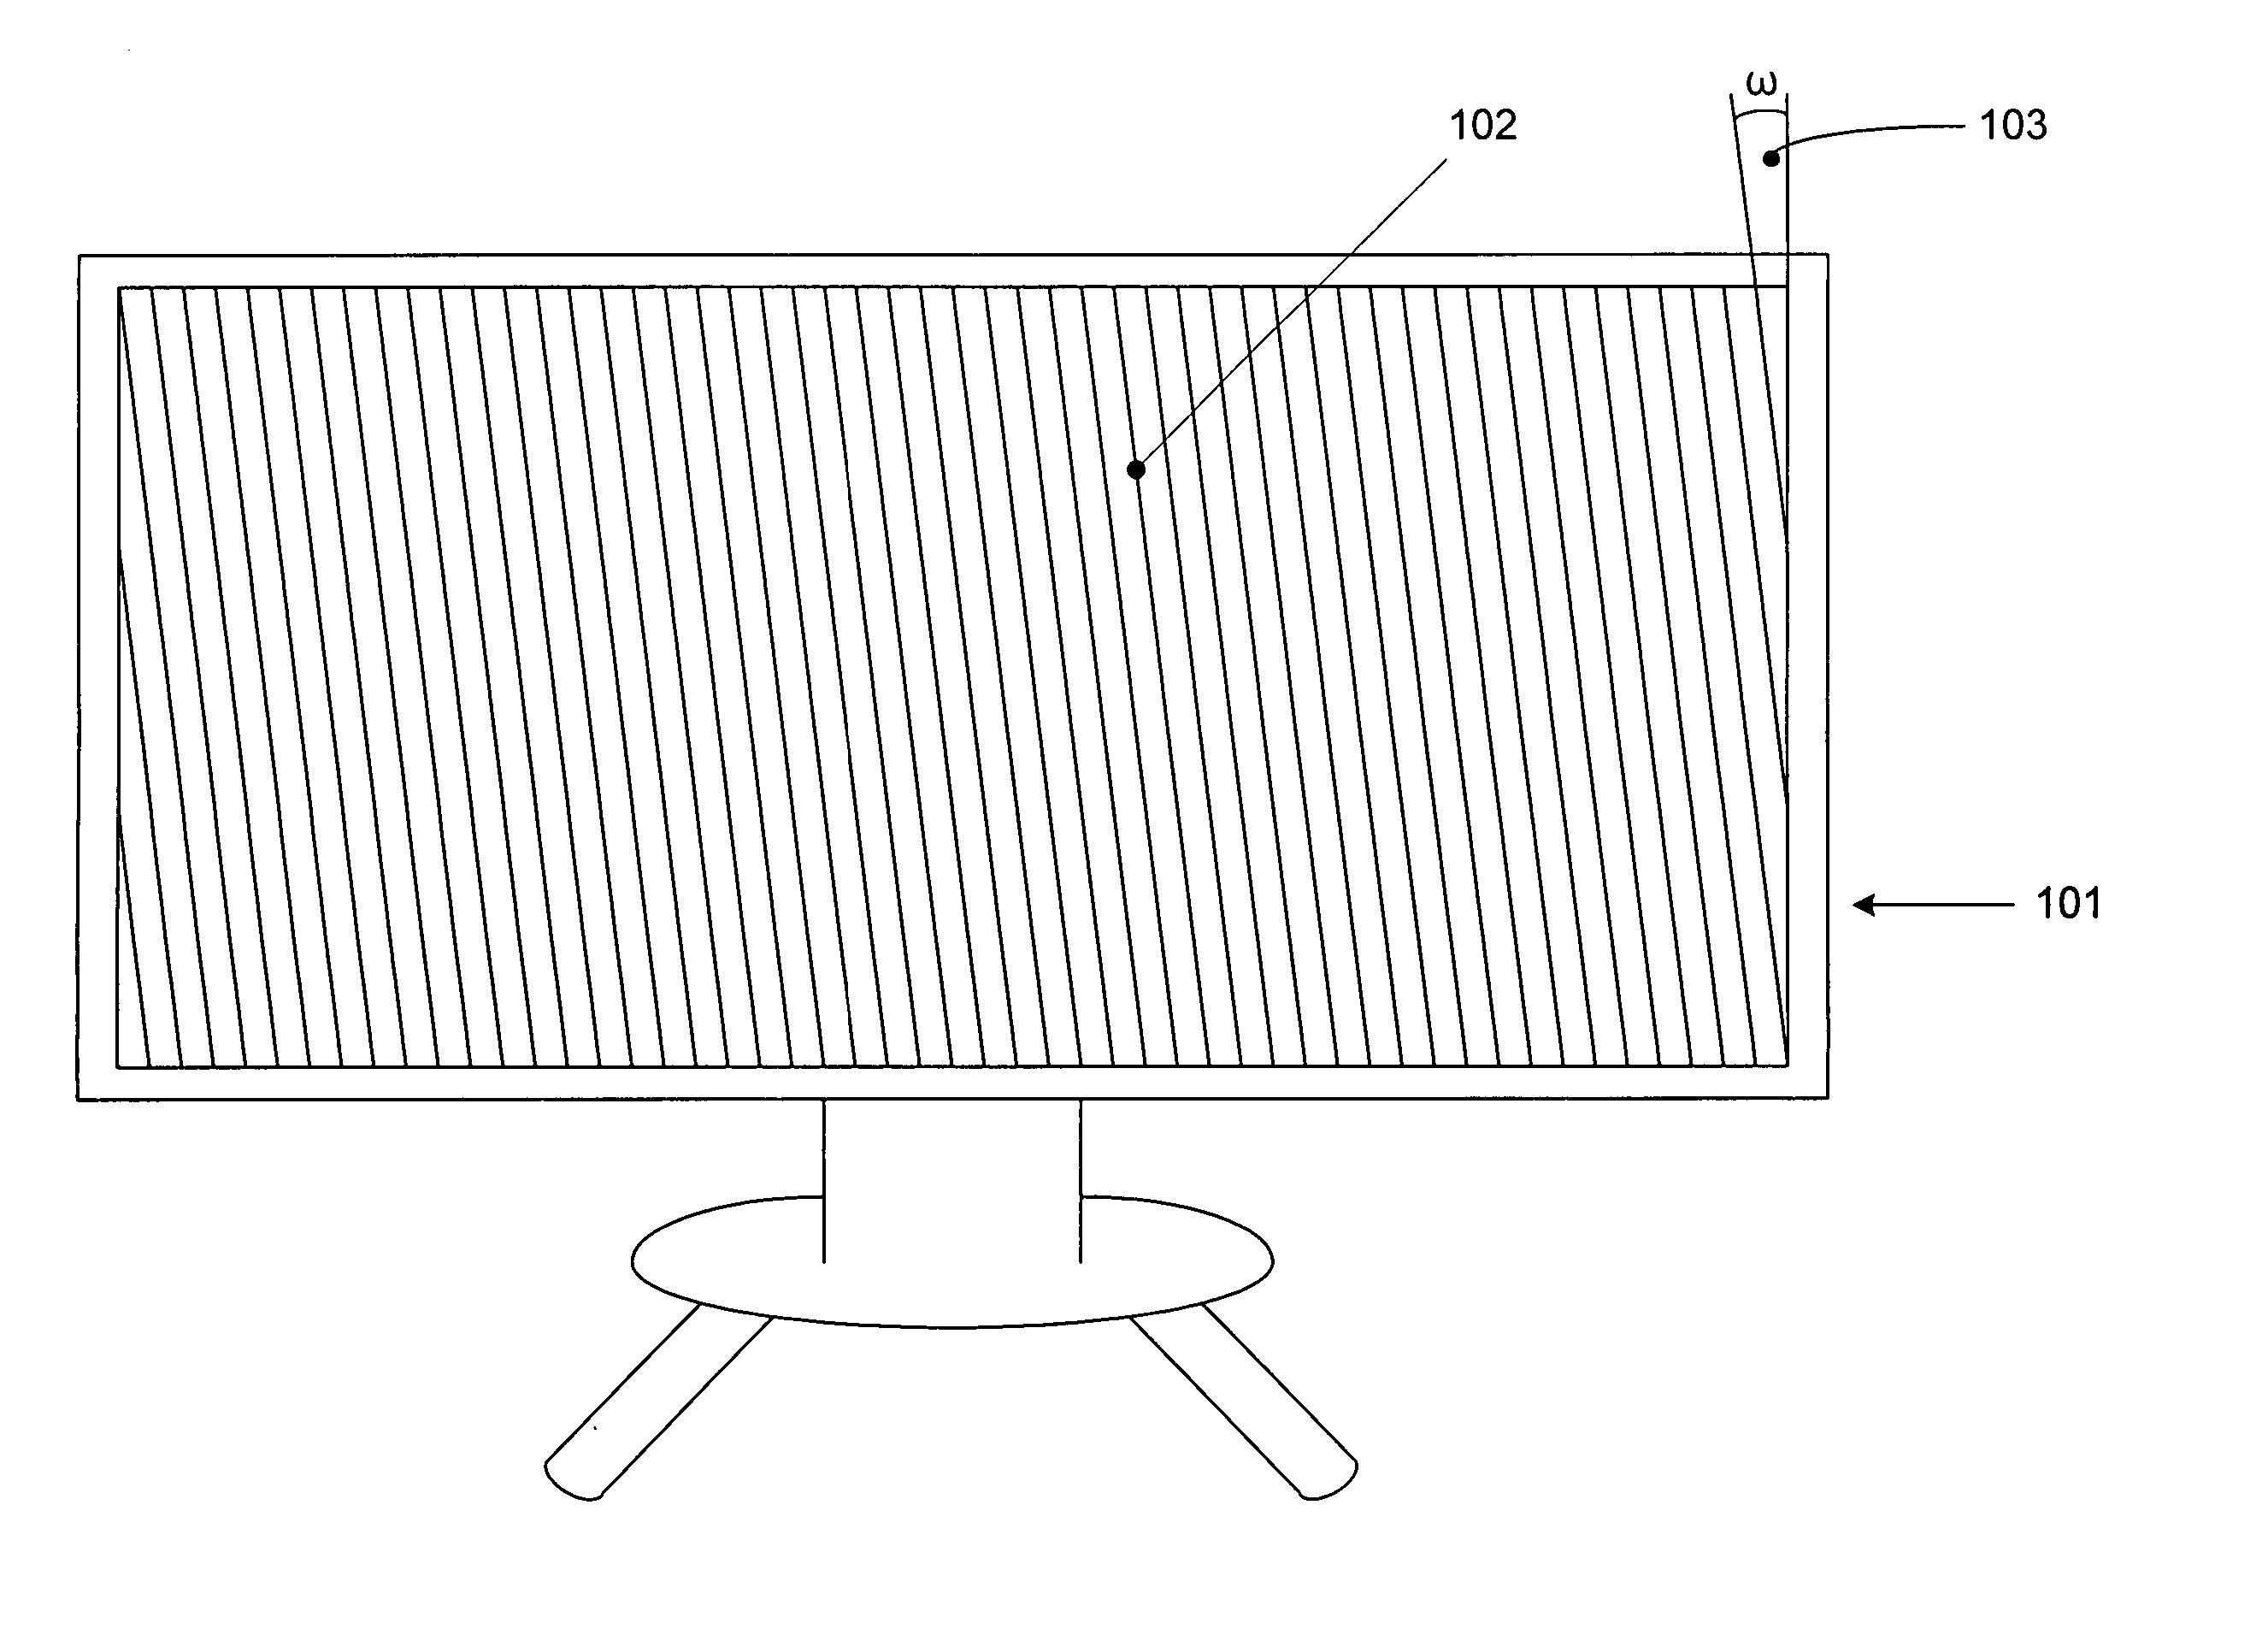 Autostereoscopic display with planar pass-through